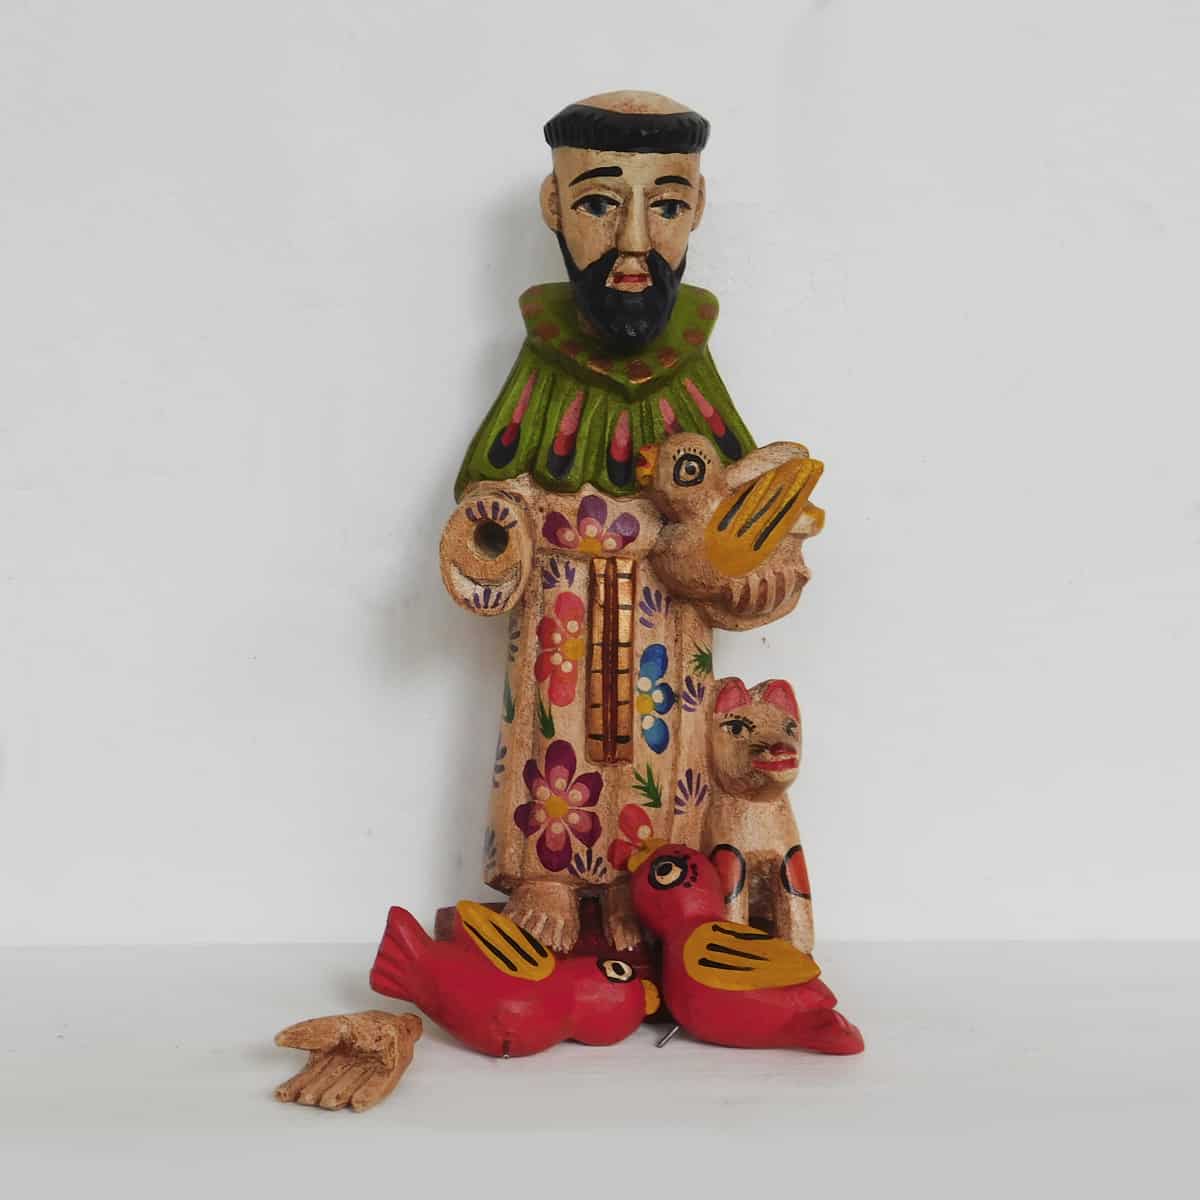 st francis of assisi figurine with removable birds and hand. handmade in guatemala.